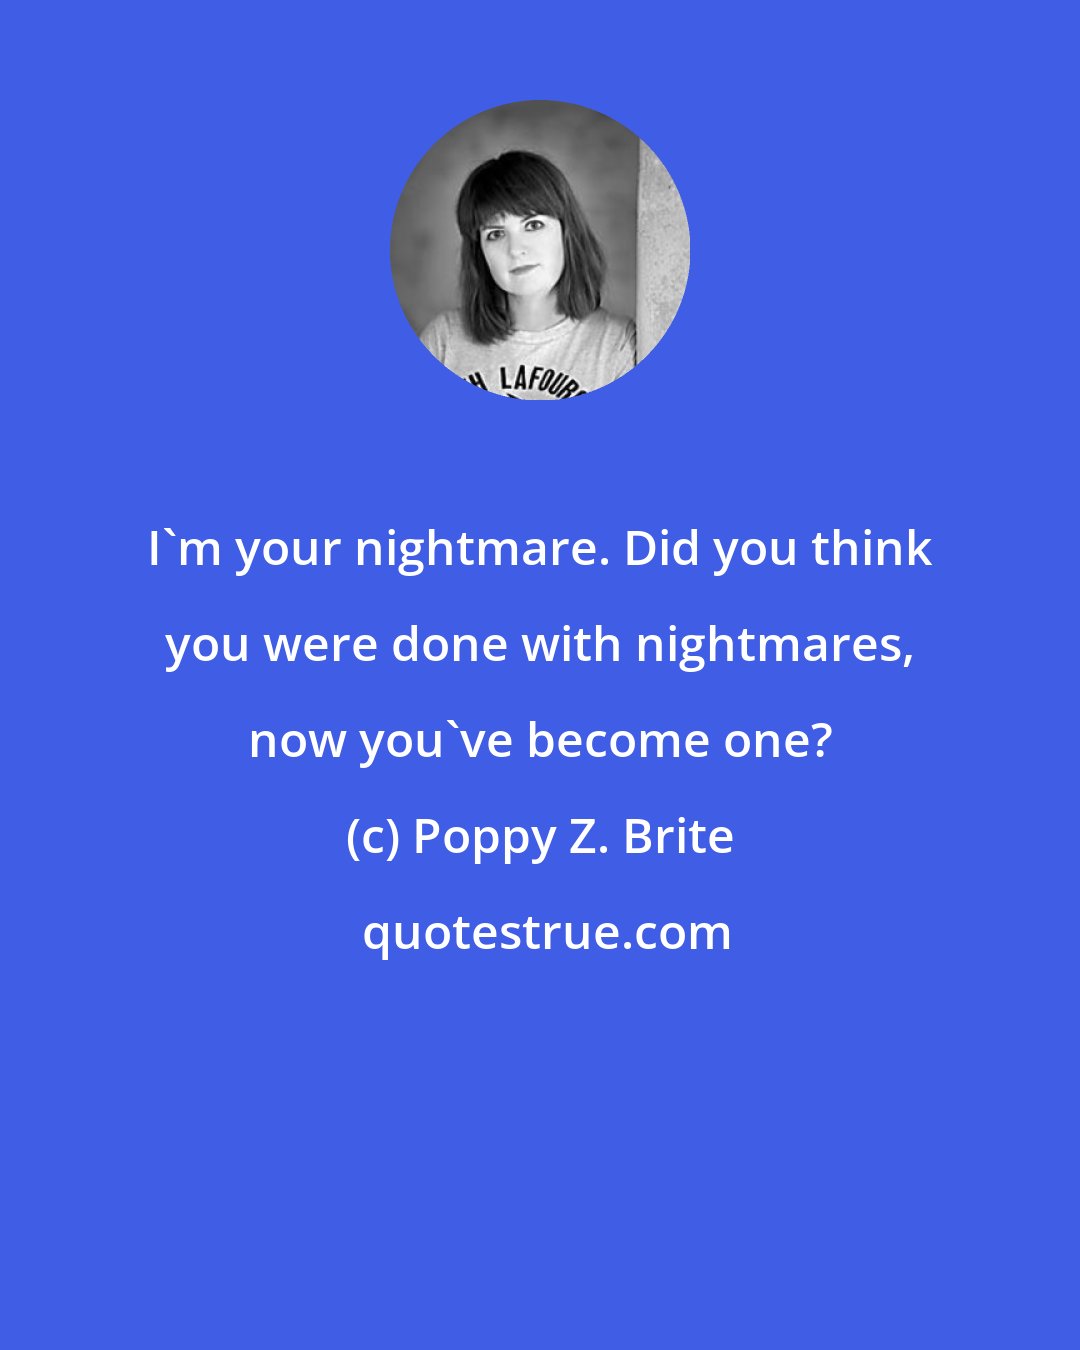 Poppy Z. Brite: I'm your nightmare. Did you think you were done with nightmares, now you've become one?